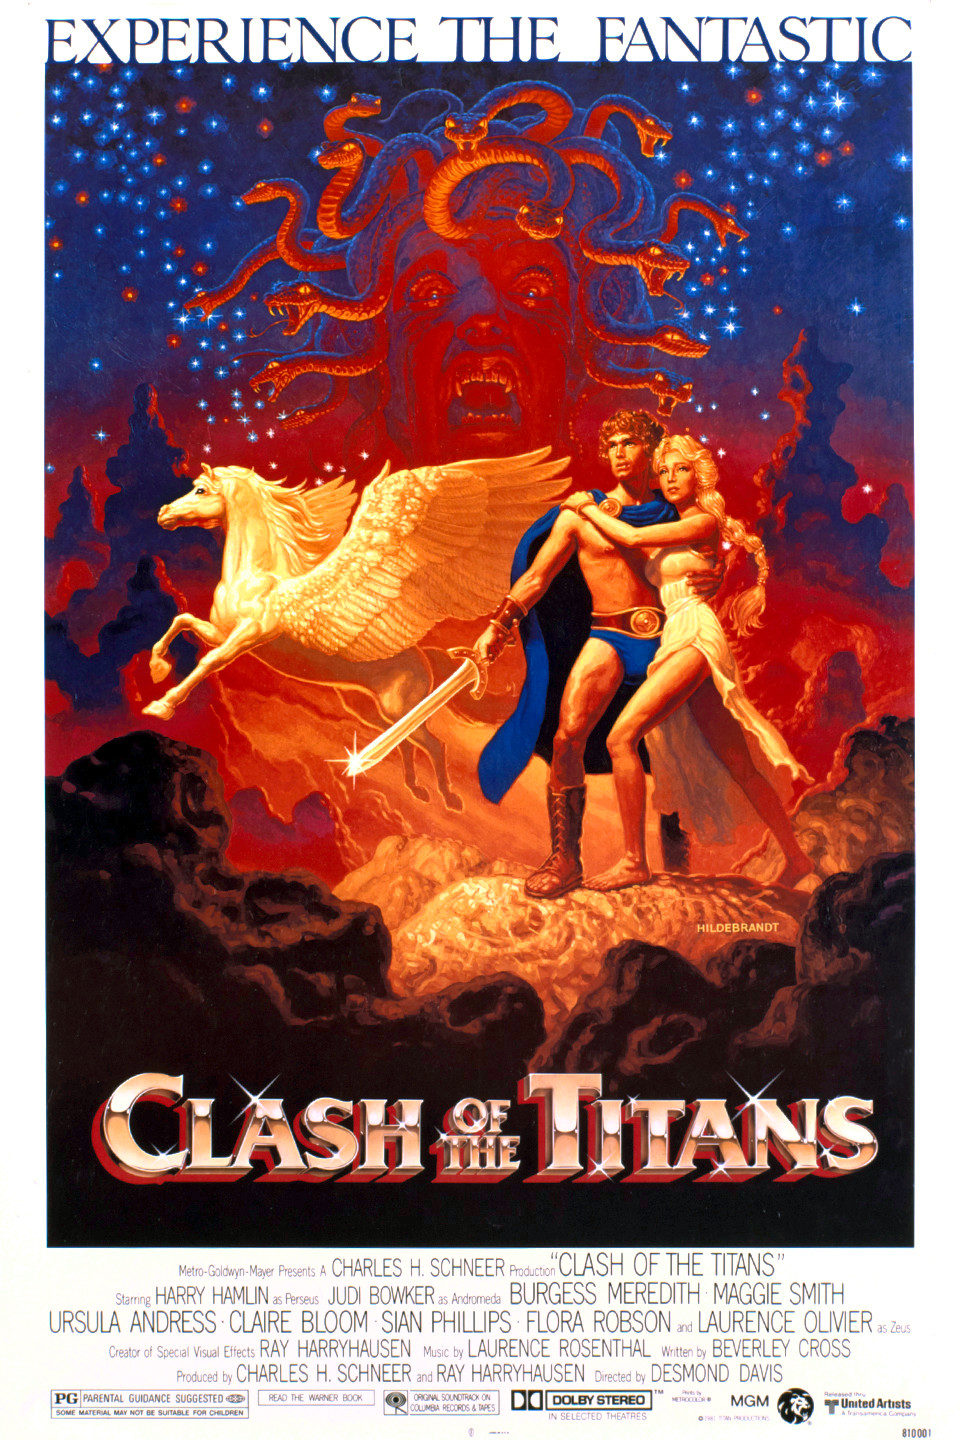 Review: 'Clash of the Titans' updates '80s camp